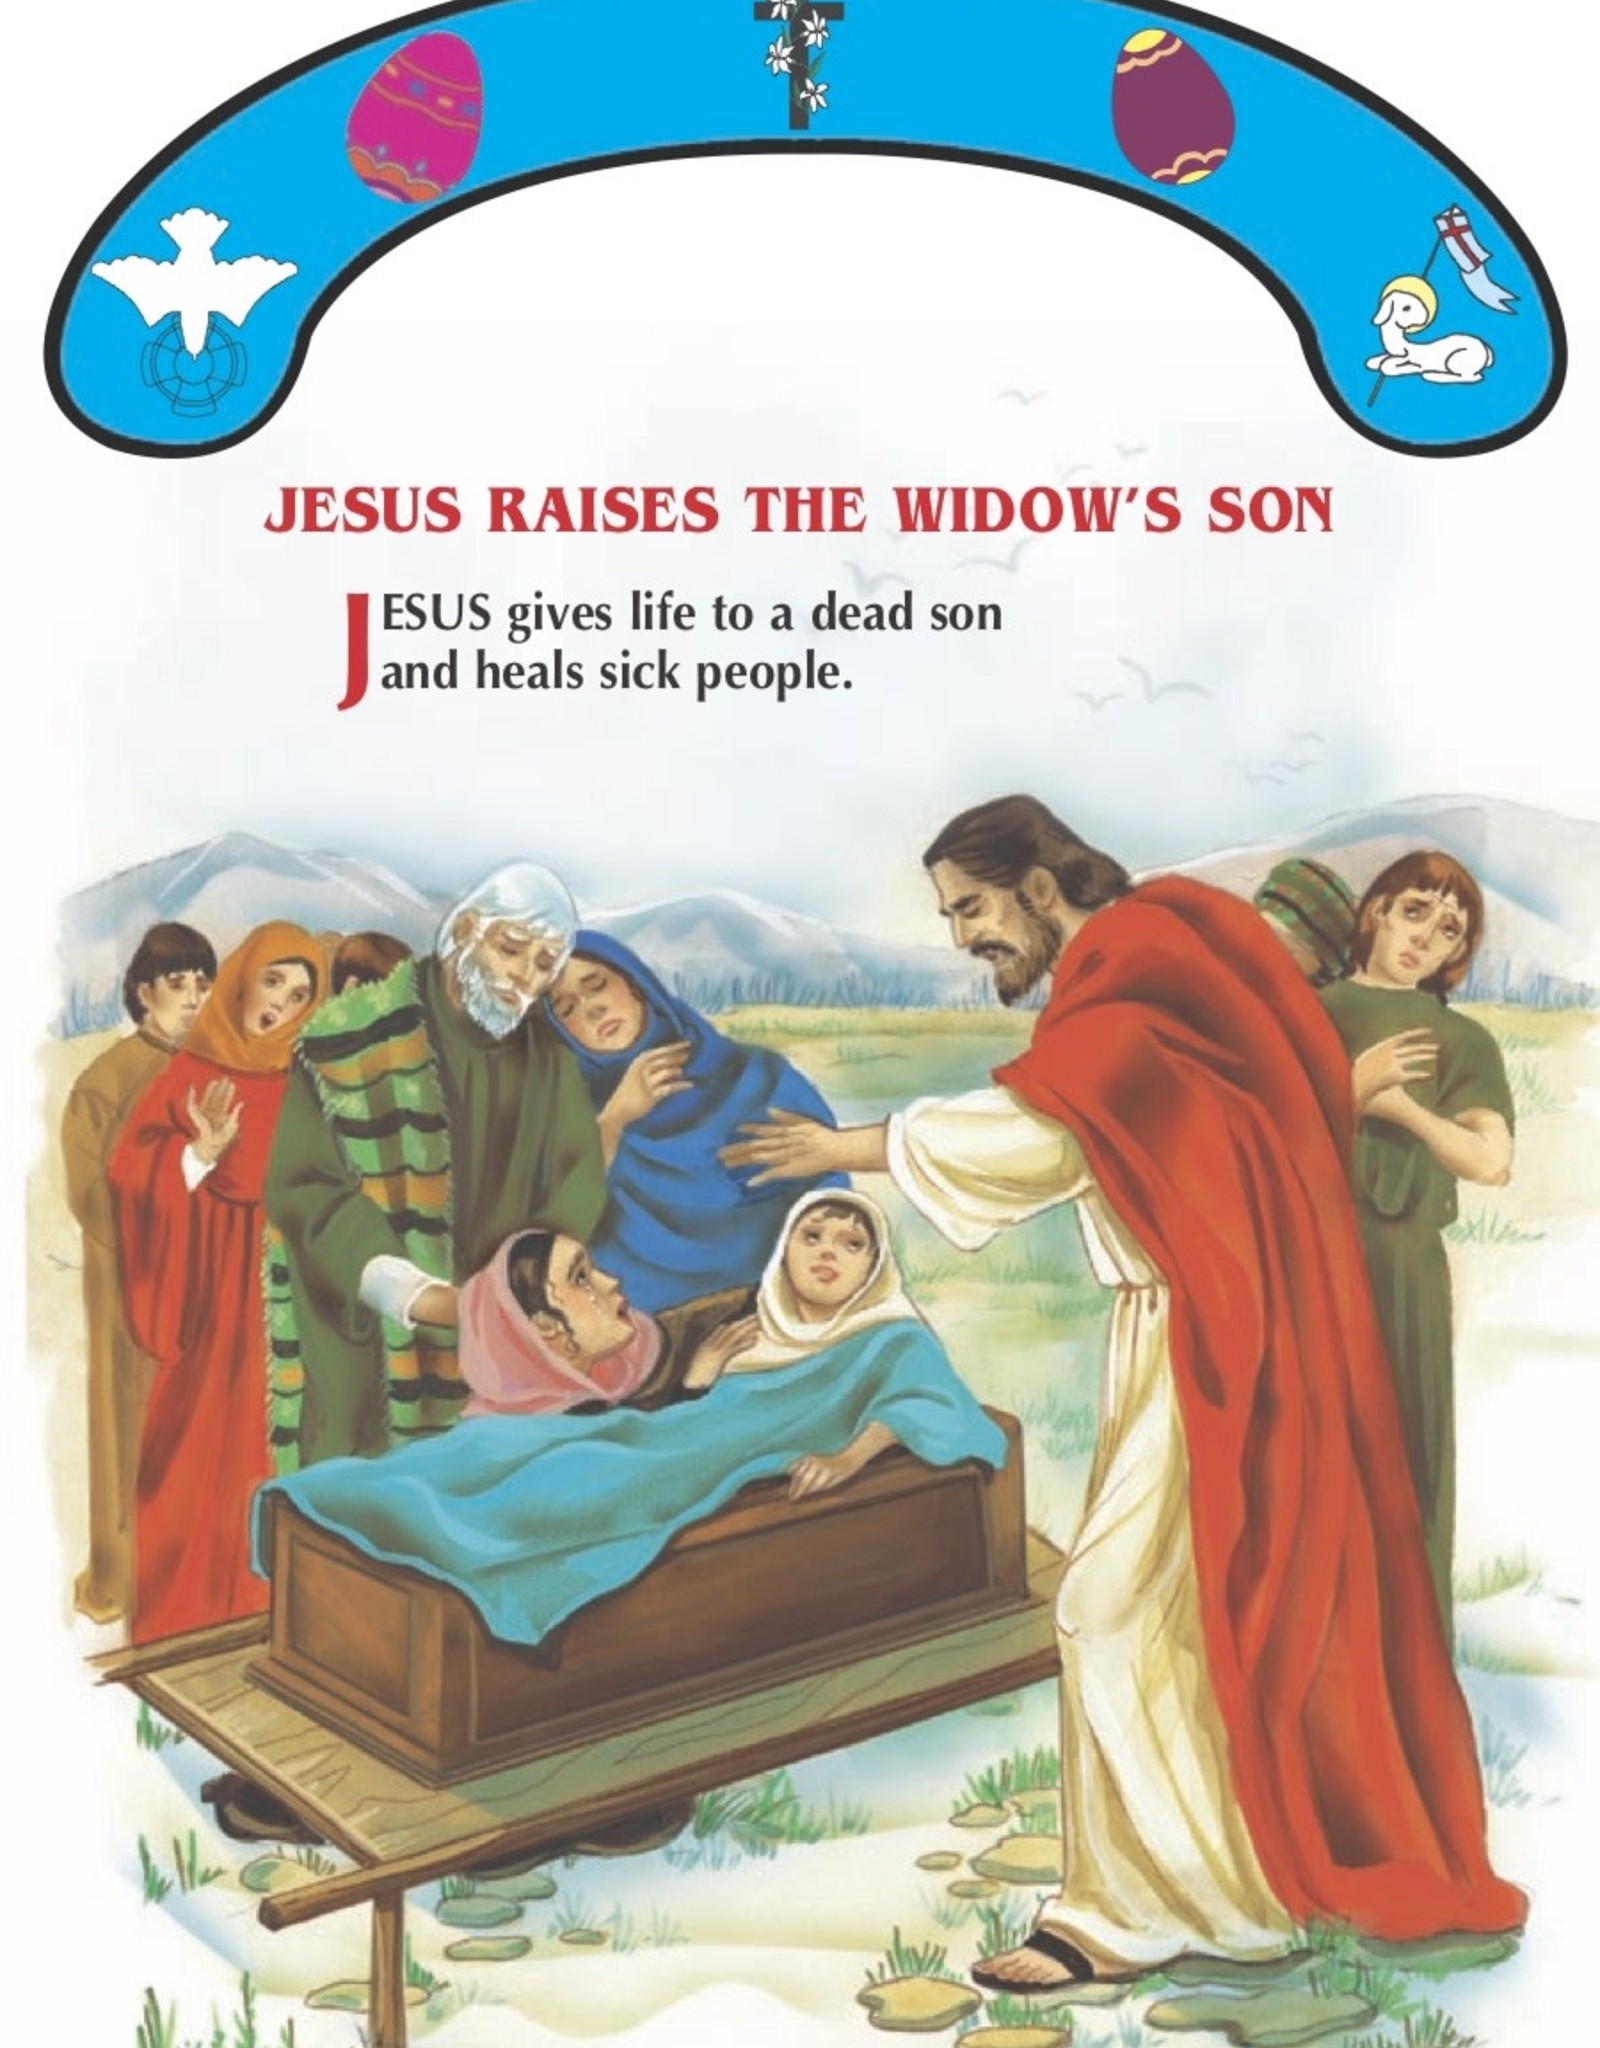 Catholic Book Publishing The Story of Easter (St. Joseph ""Carry-Me-Along"" Board Book), by George Brundage